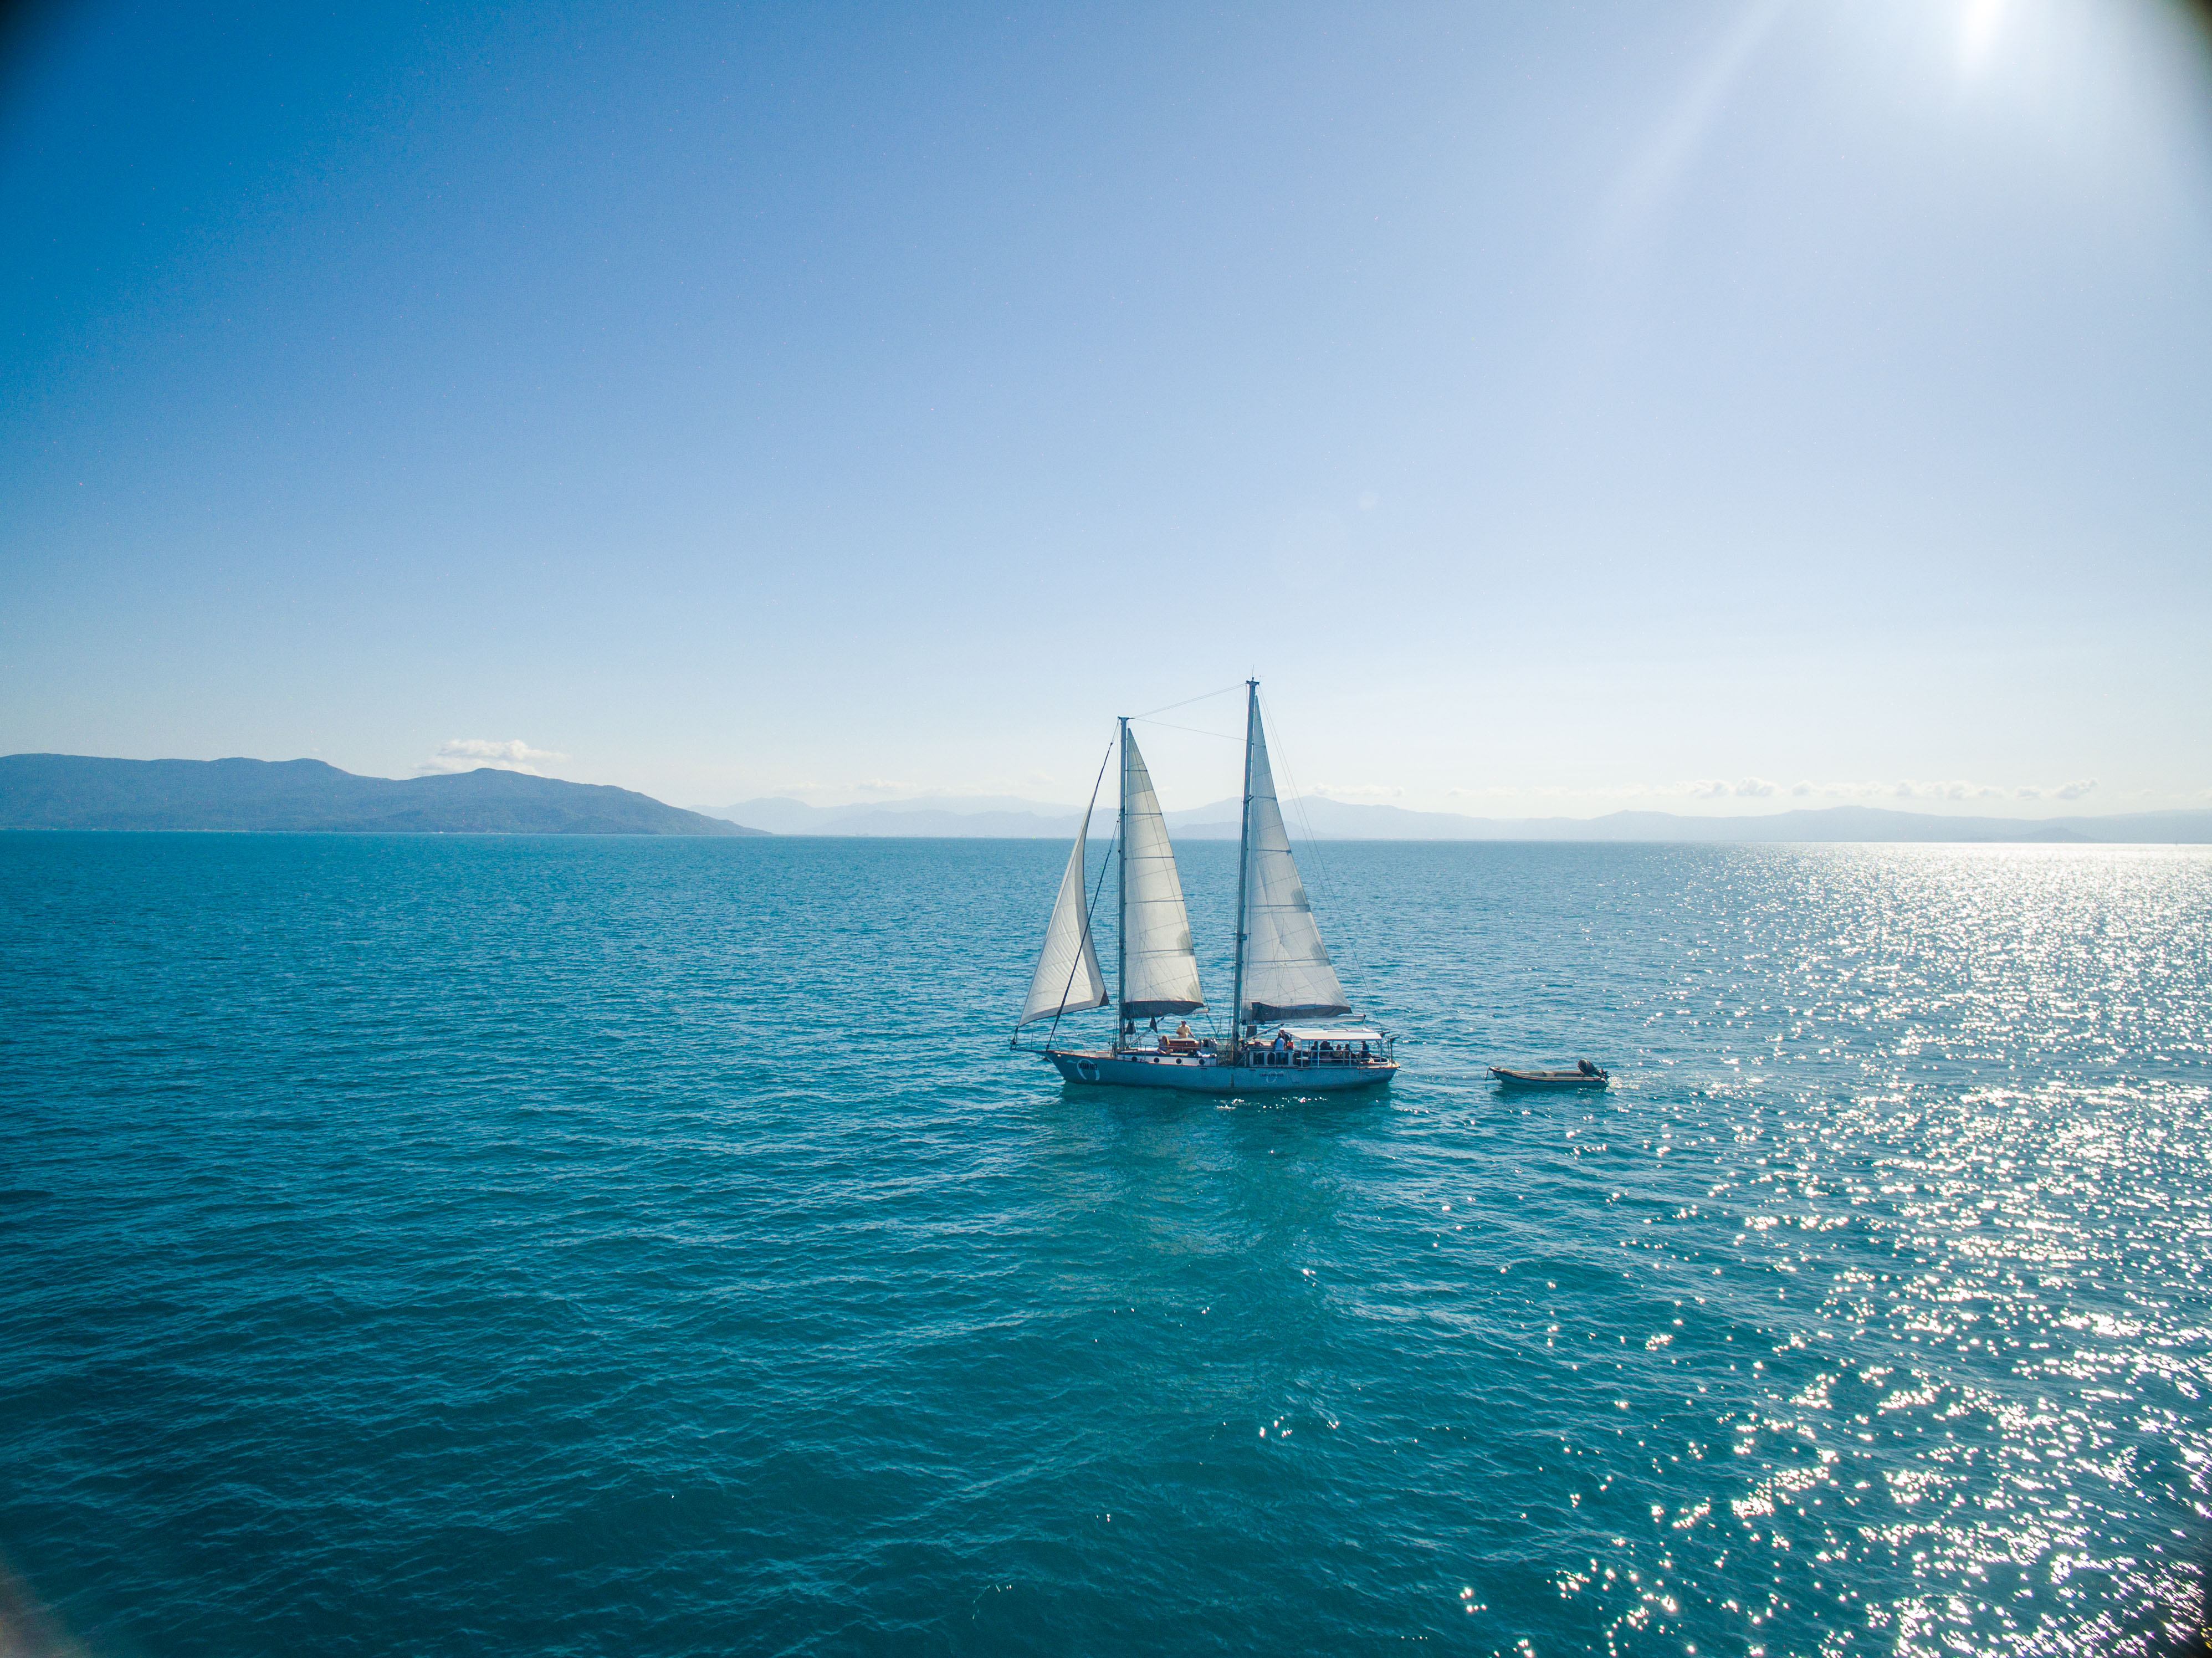 Ocean Free is a 16.5 metre sailing schooner. Check in at Reef Fleet Terminal from 7.15am at Ocean Free + Ocean Freedom desk. Board from 7.30am A Finger No. 4 at the Marlin Marina, Cairns for an 8am departure – coffee, tea and Danish pastries and fresh fruit served on boarding.